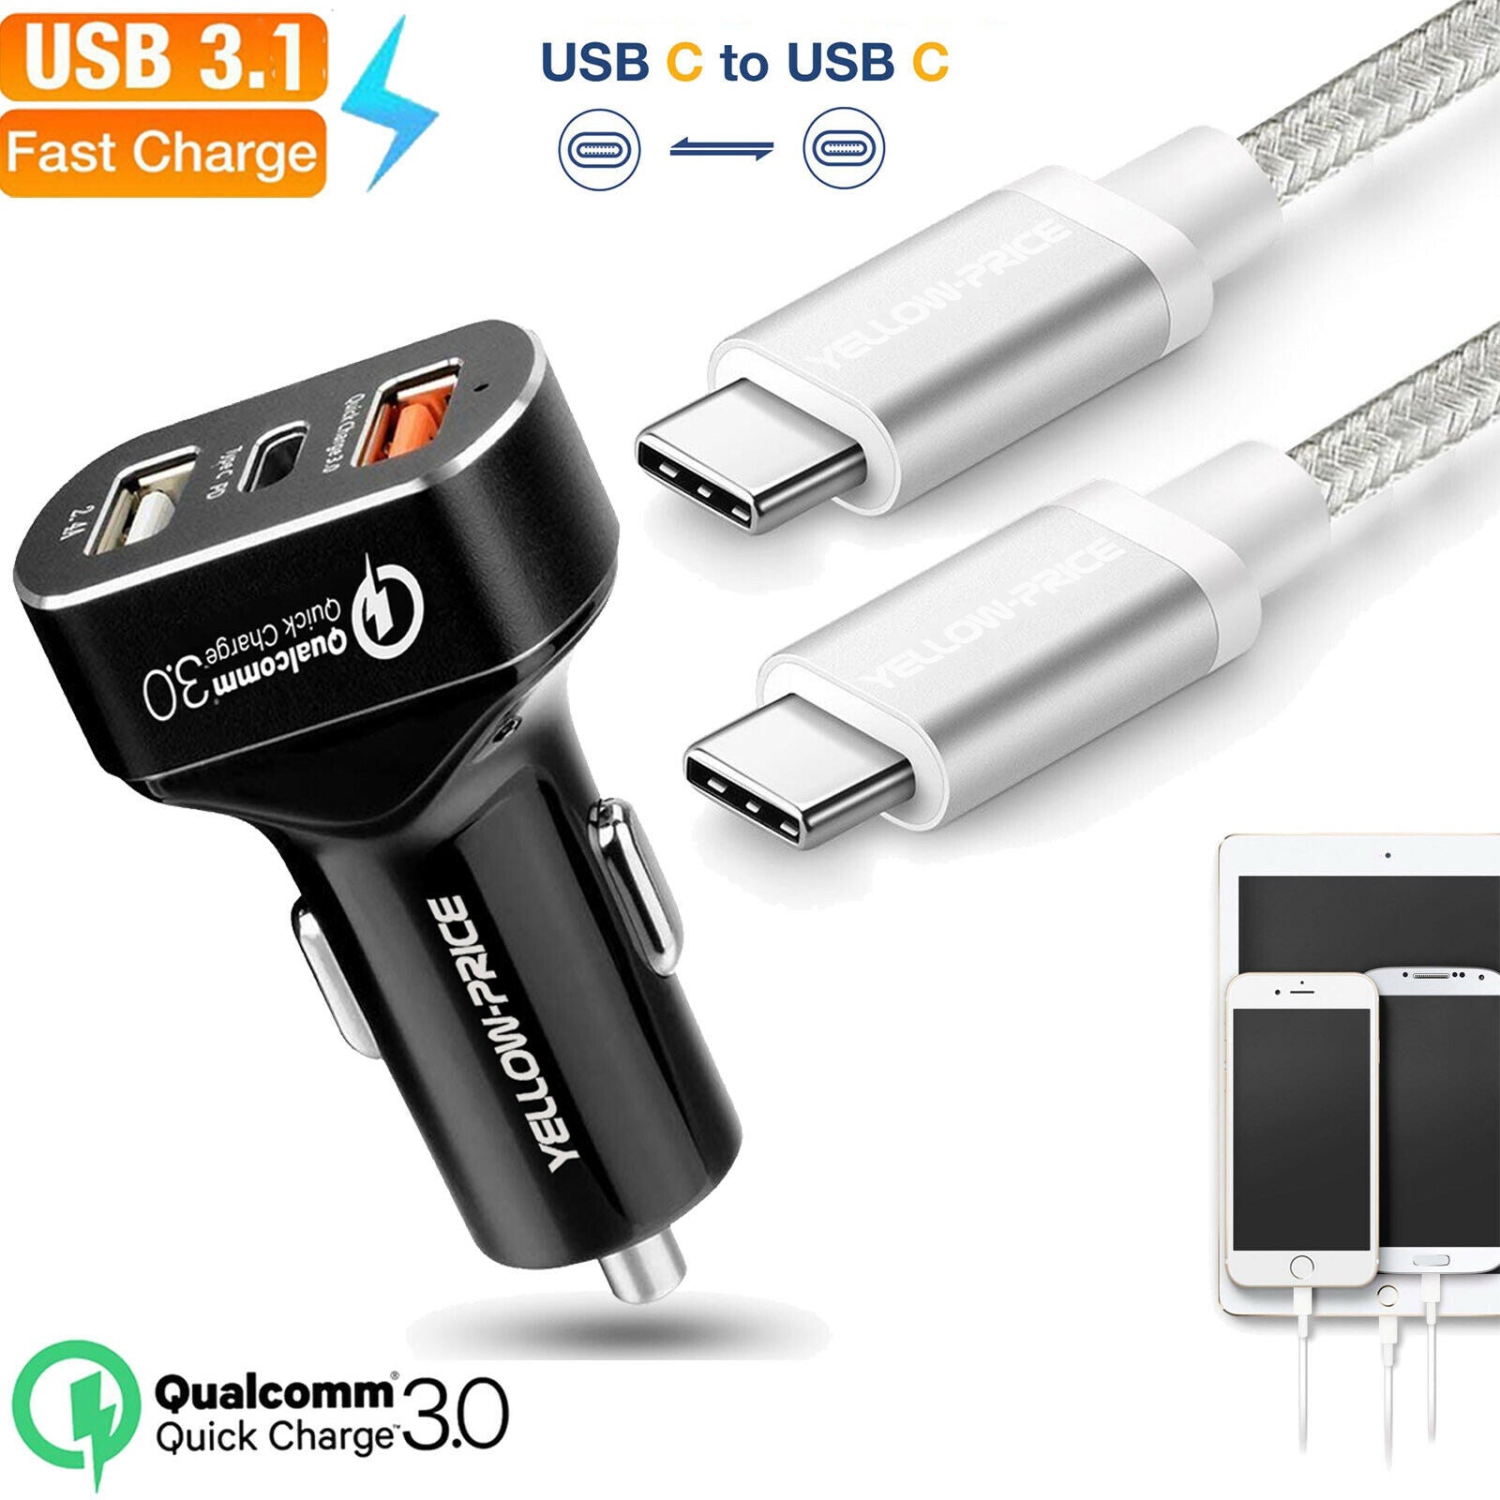 Samsung Galaxy Note 10 S9 S10 S20 USB Fast Quick Car Charger Adapter Type C Port